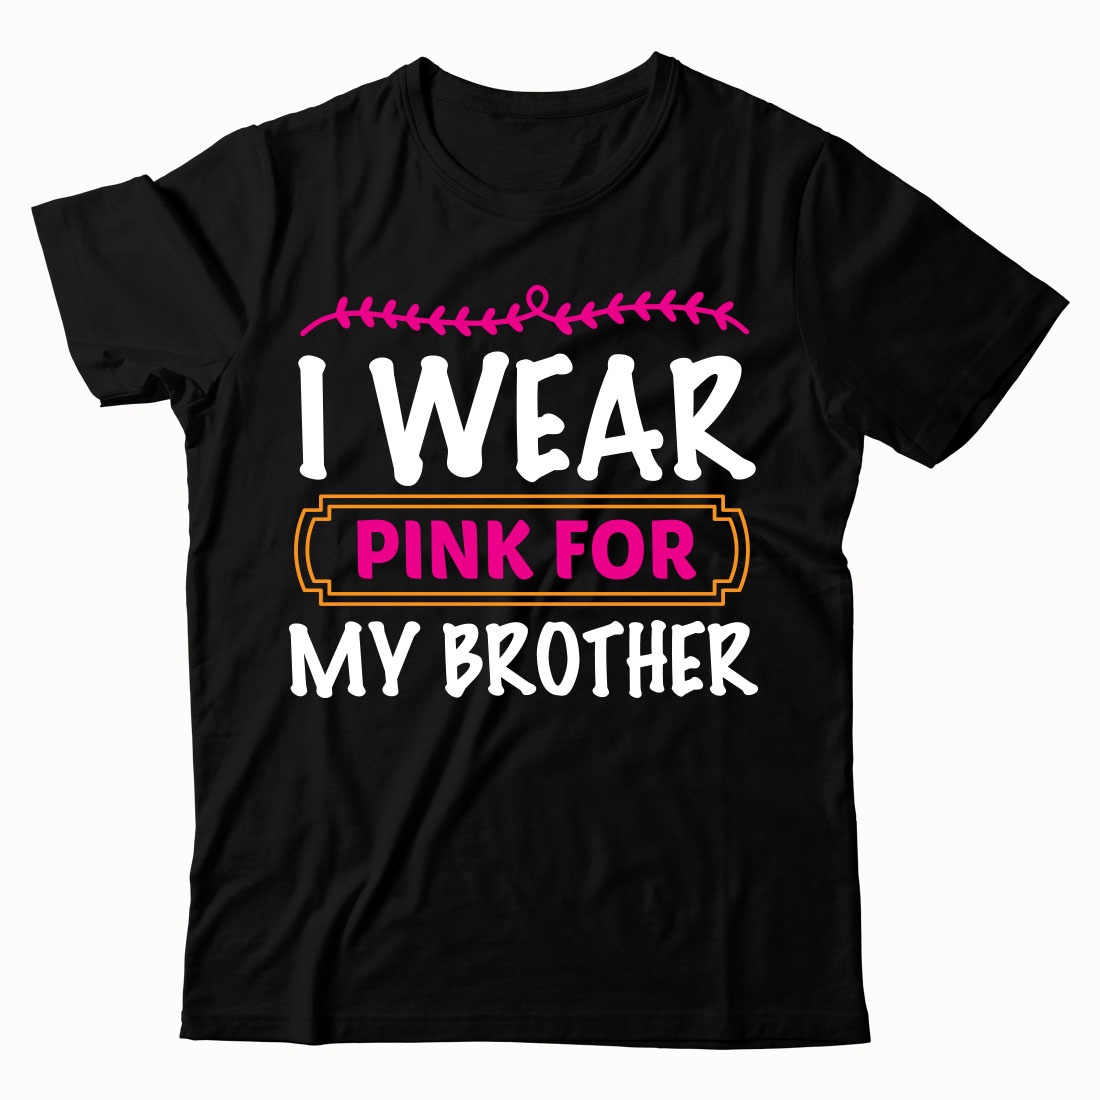 I wear pink for my brother t - shirt.